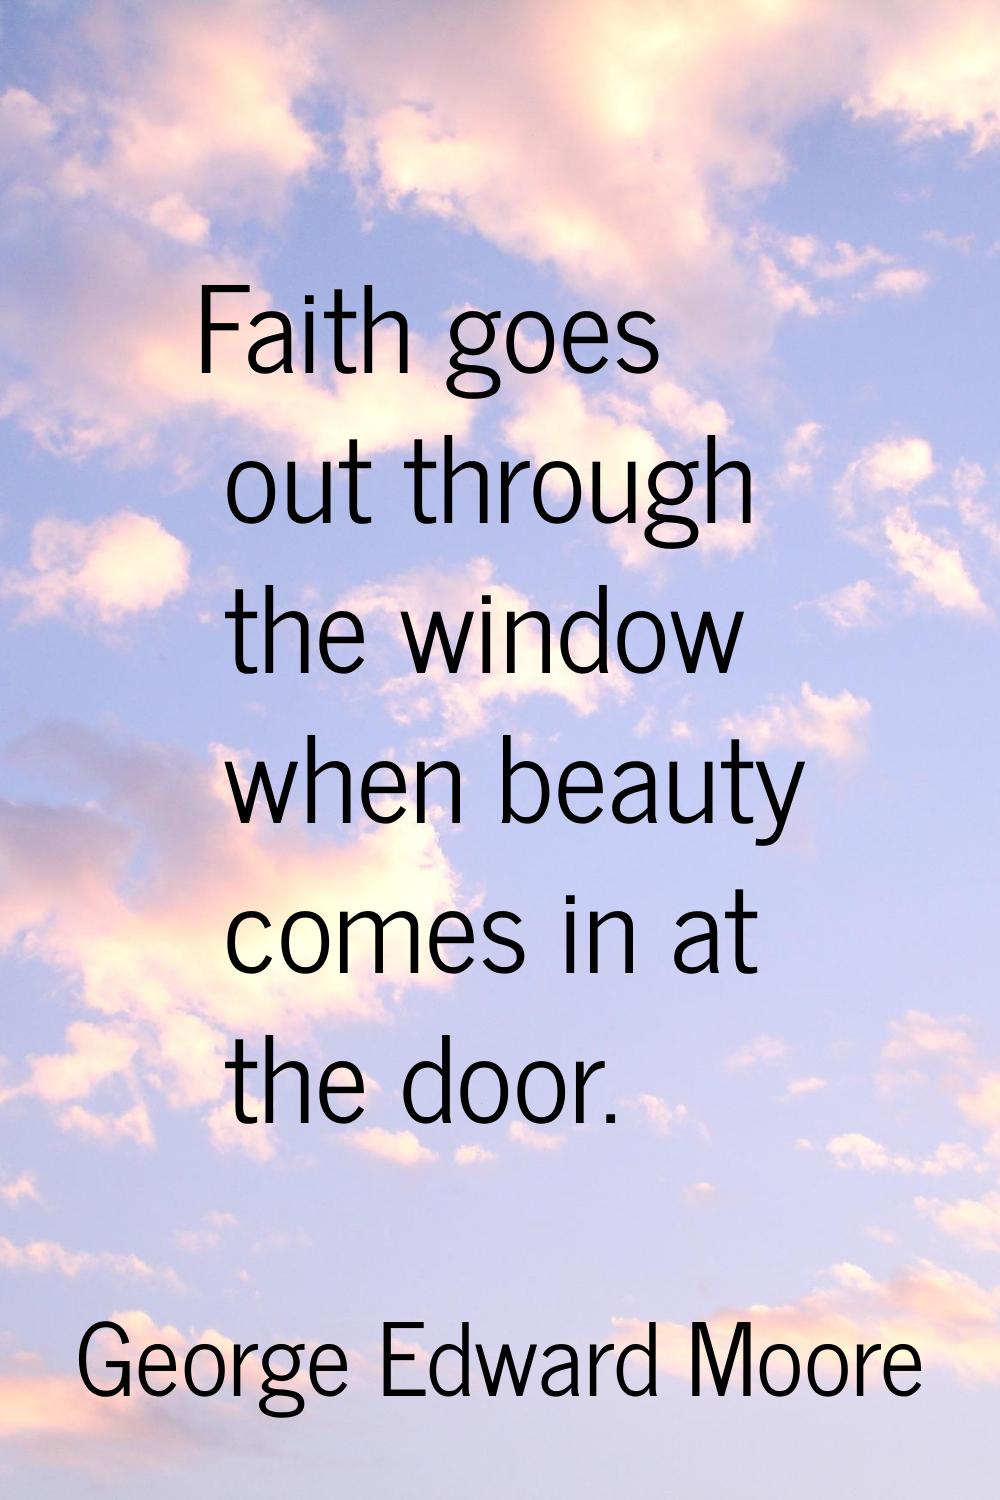 Faith goes out through the window when beauty comes in at the door.